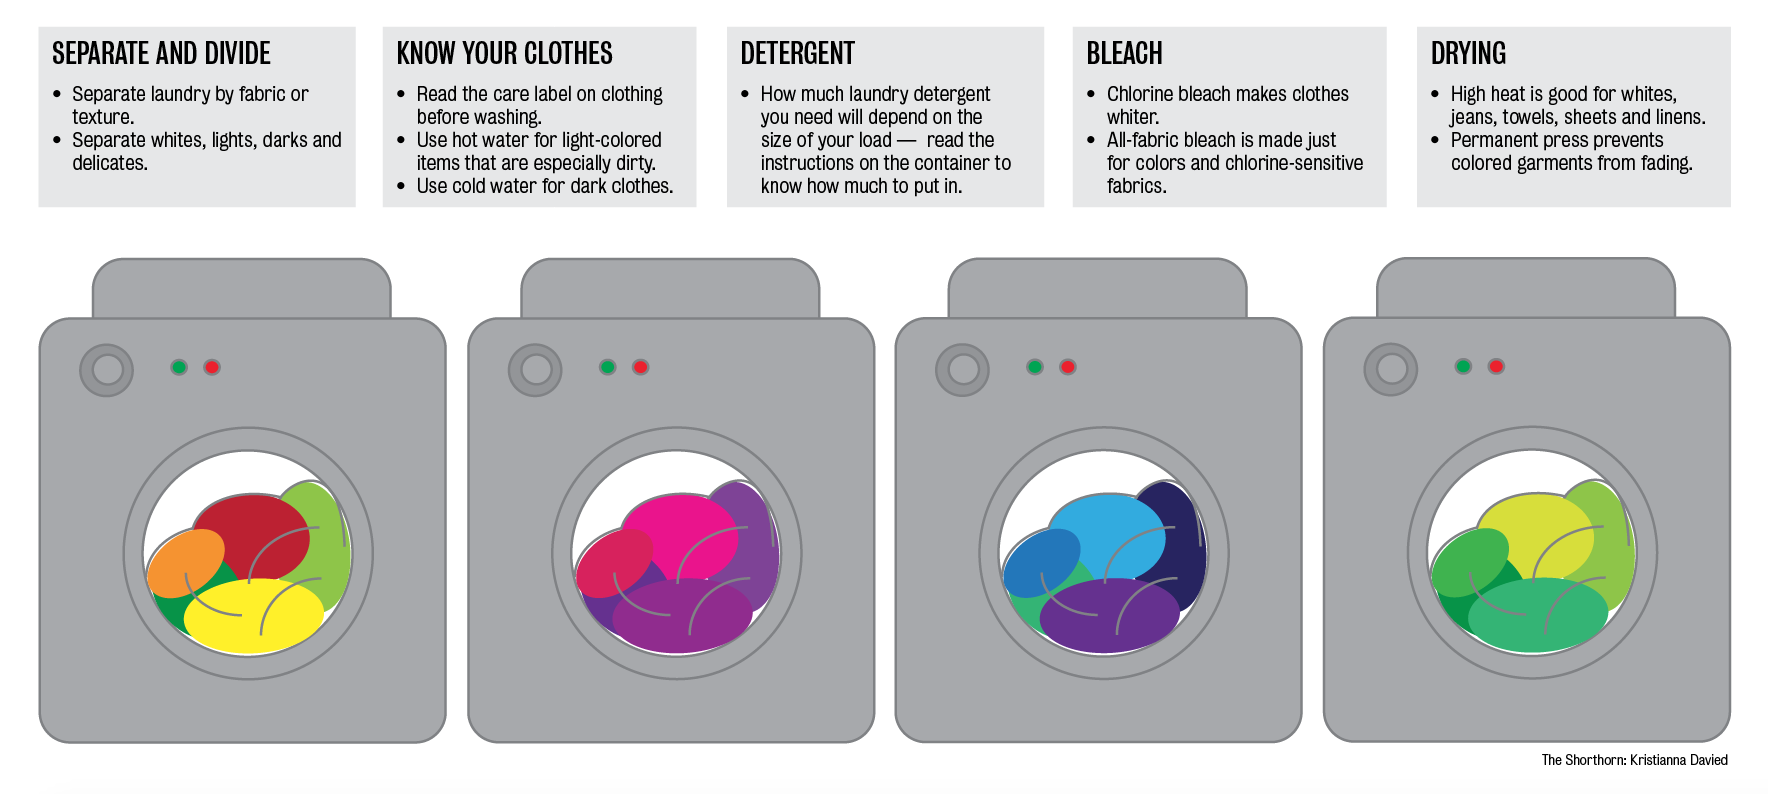 Laundry tips for students away from 